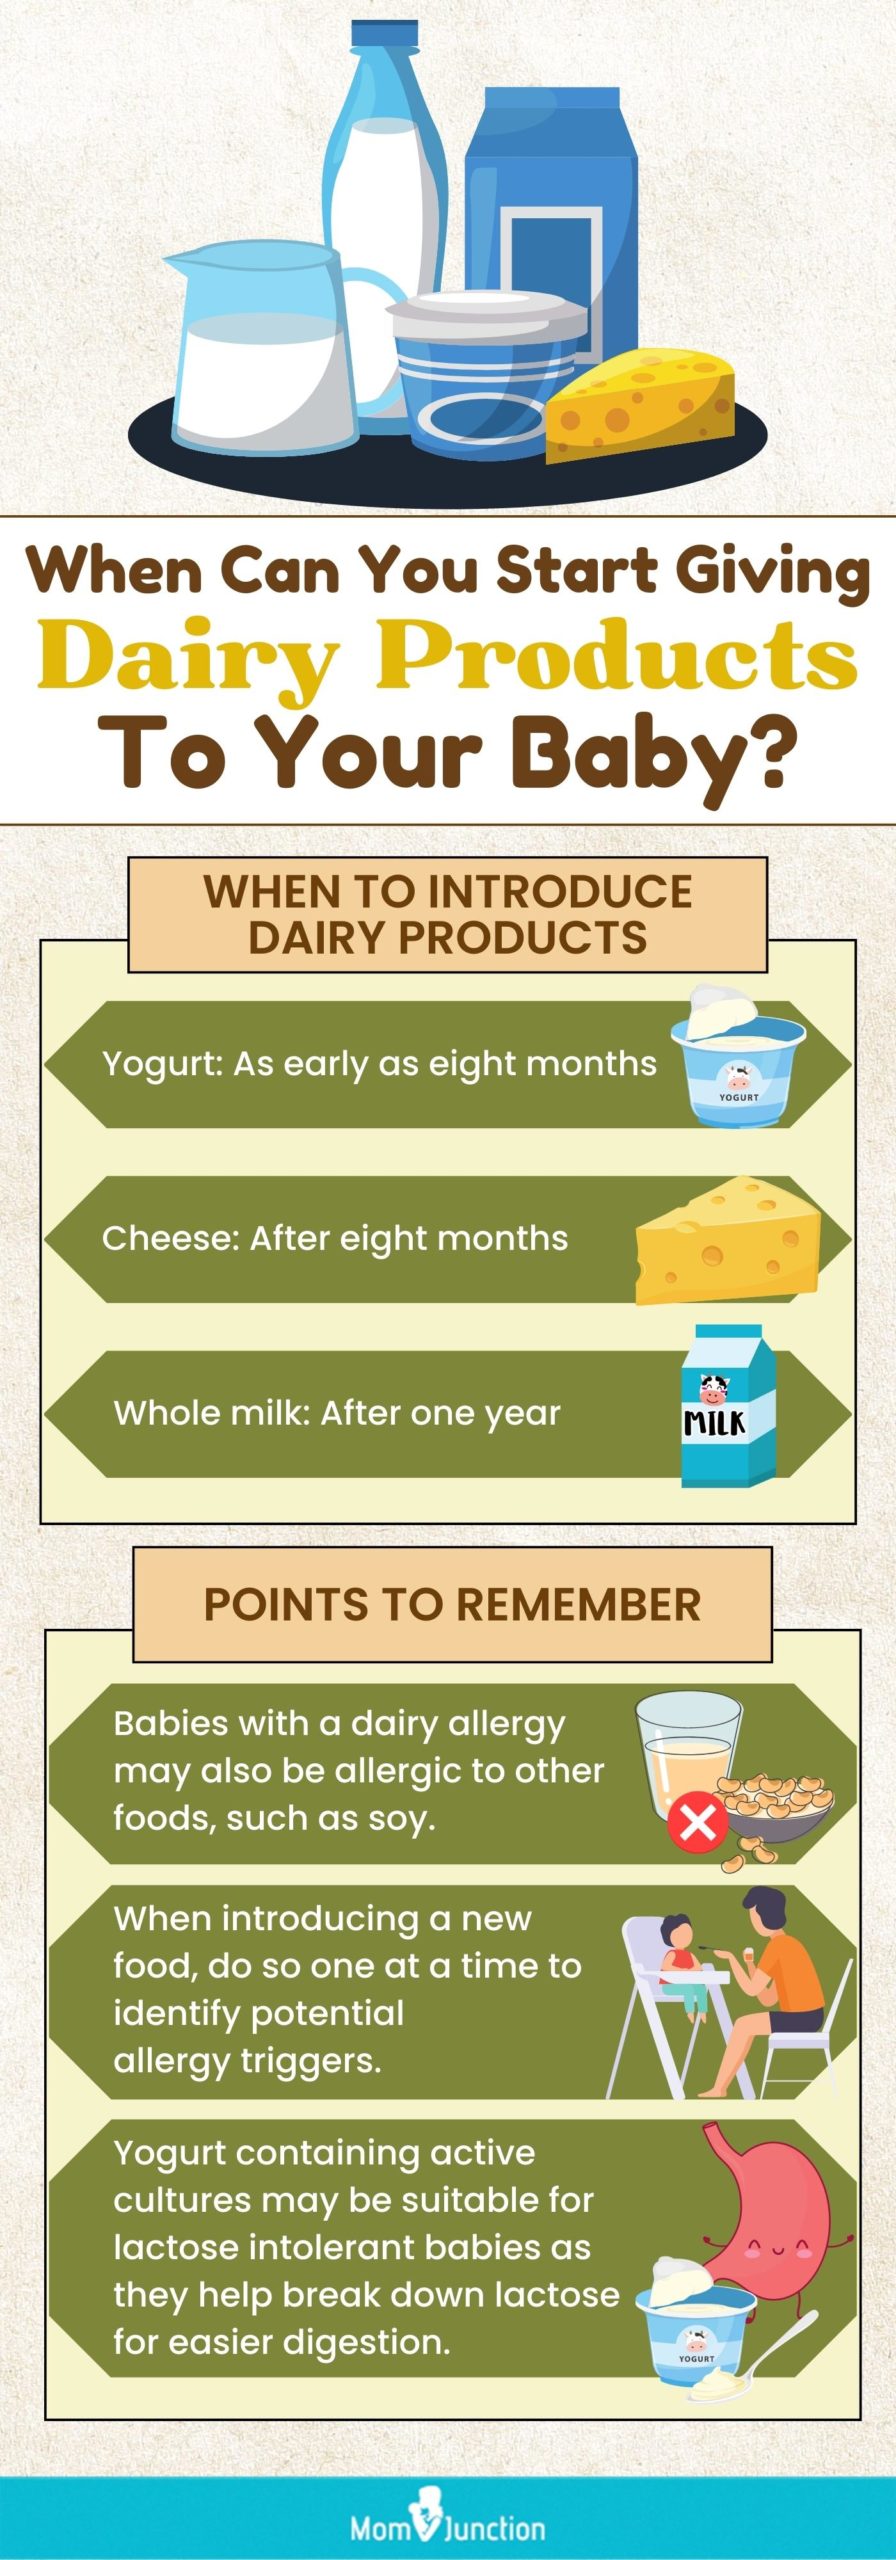 when can you start giving dairy products to your baby (infographic)